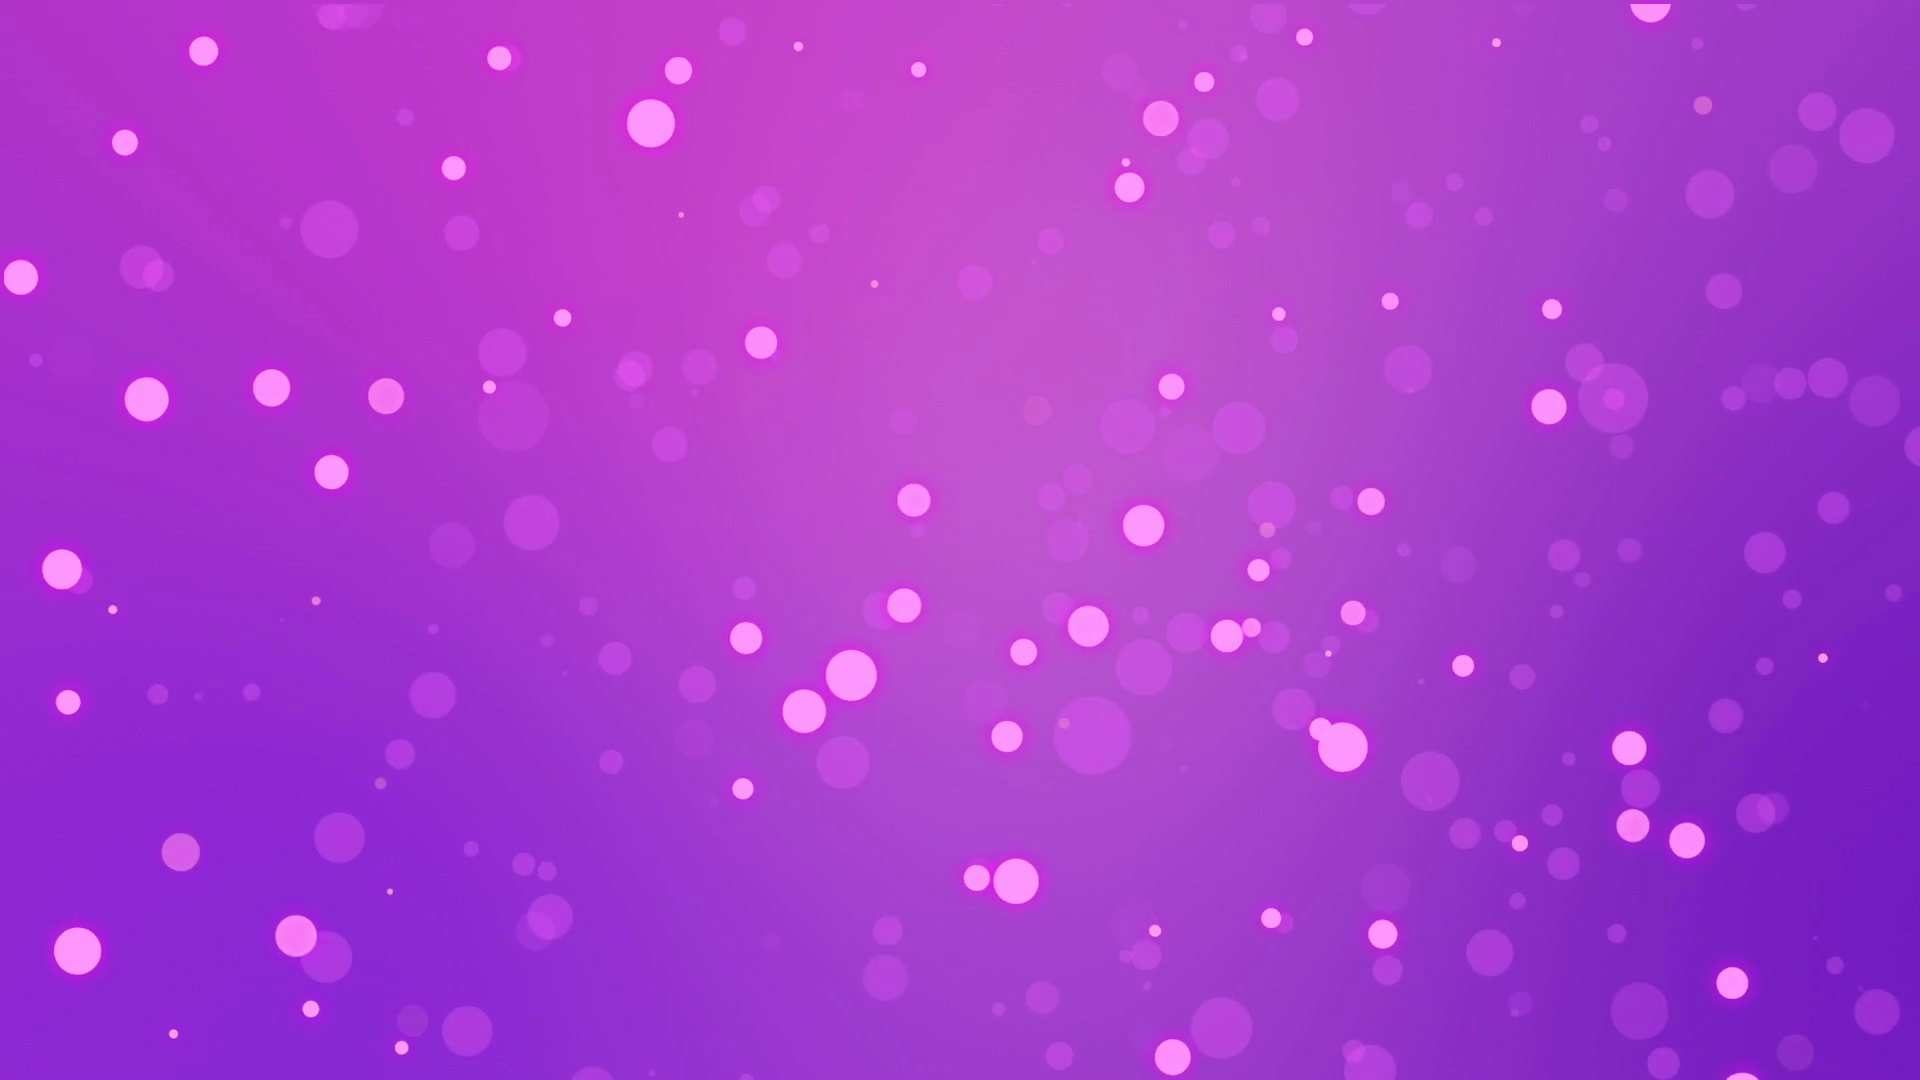 Free photo: Purple Bubble Background - Abstract, Bubble ...